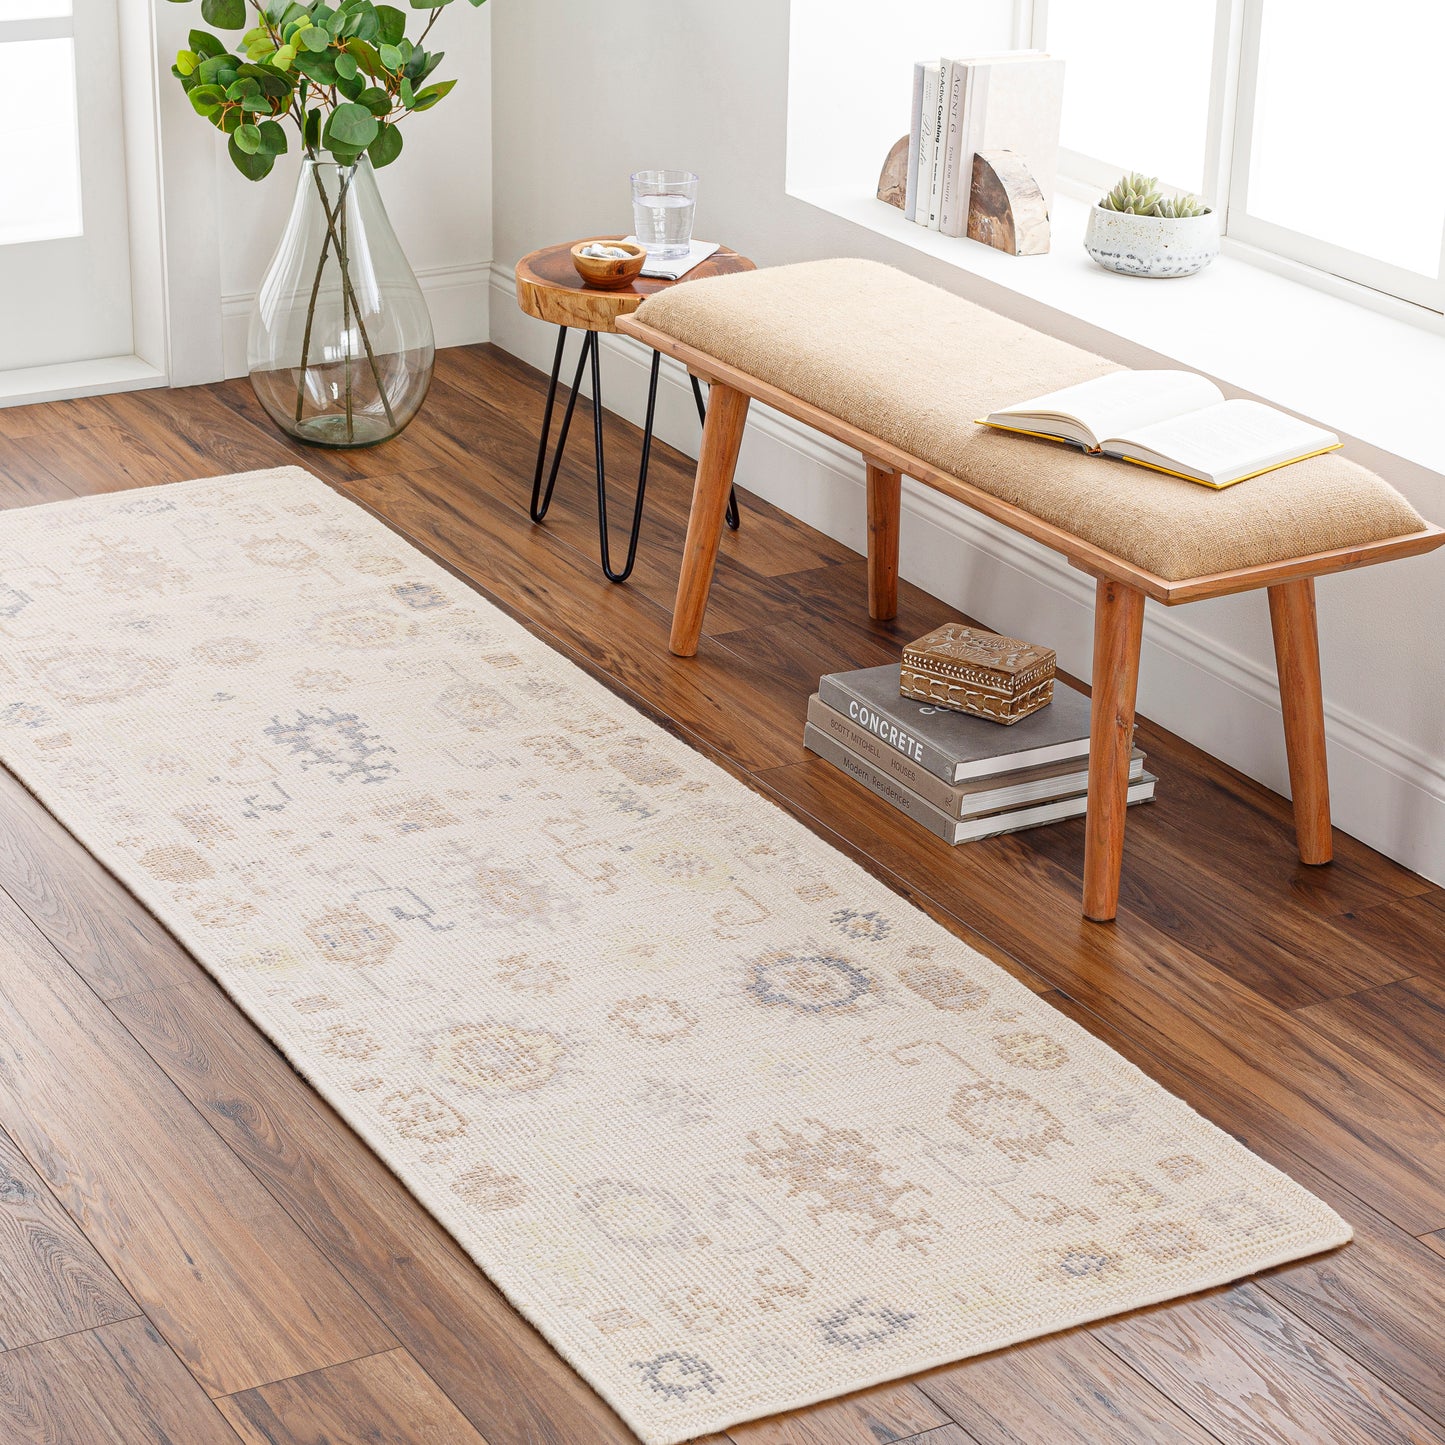 Revere 29307 Hand Knotted Synthetic Blend Indoor/Outdoor Area Rug by Surya Rugs